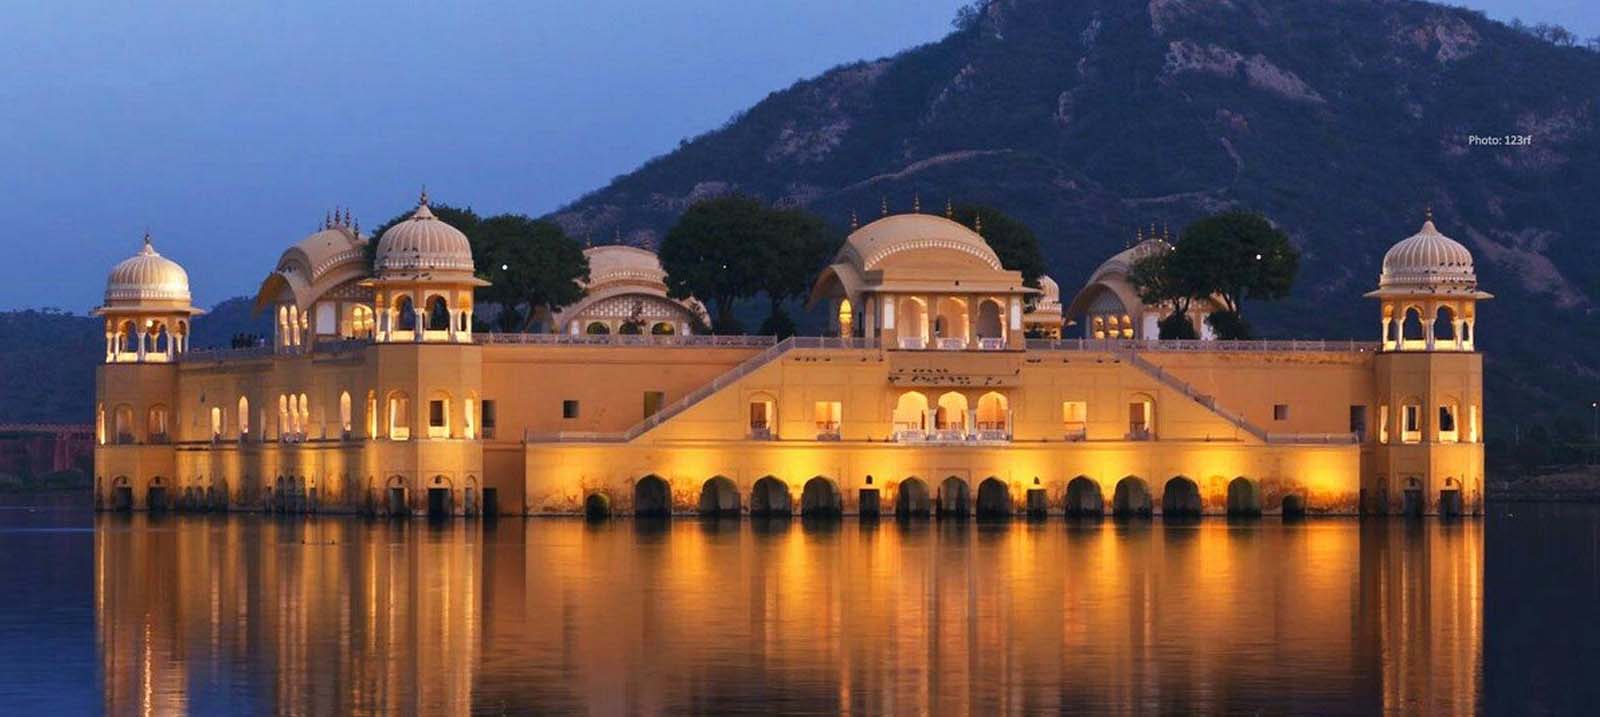 Private Jaipur Tour from Agra by Car